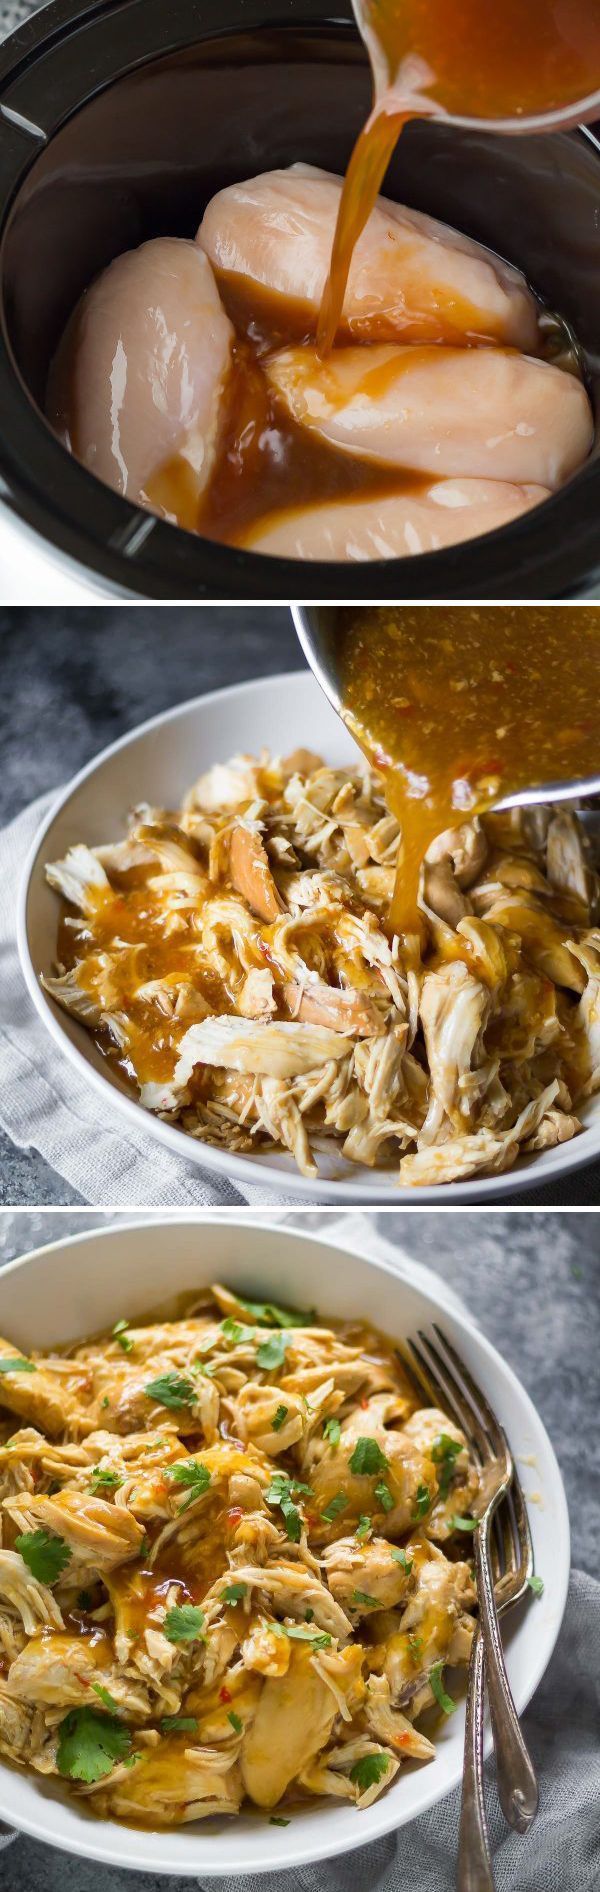 This slow cooker sweet chili chicken requires only 7 ingredients!  Plus 3 recipes